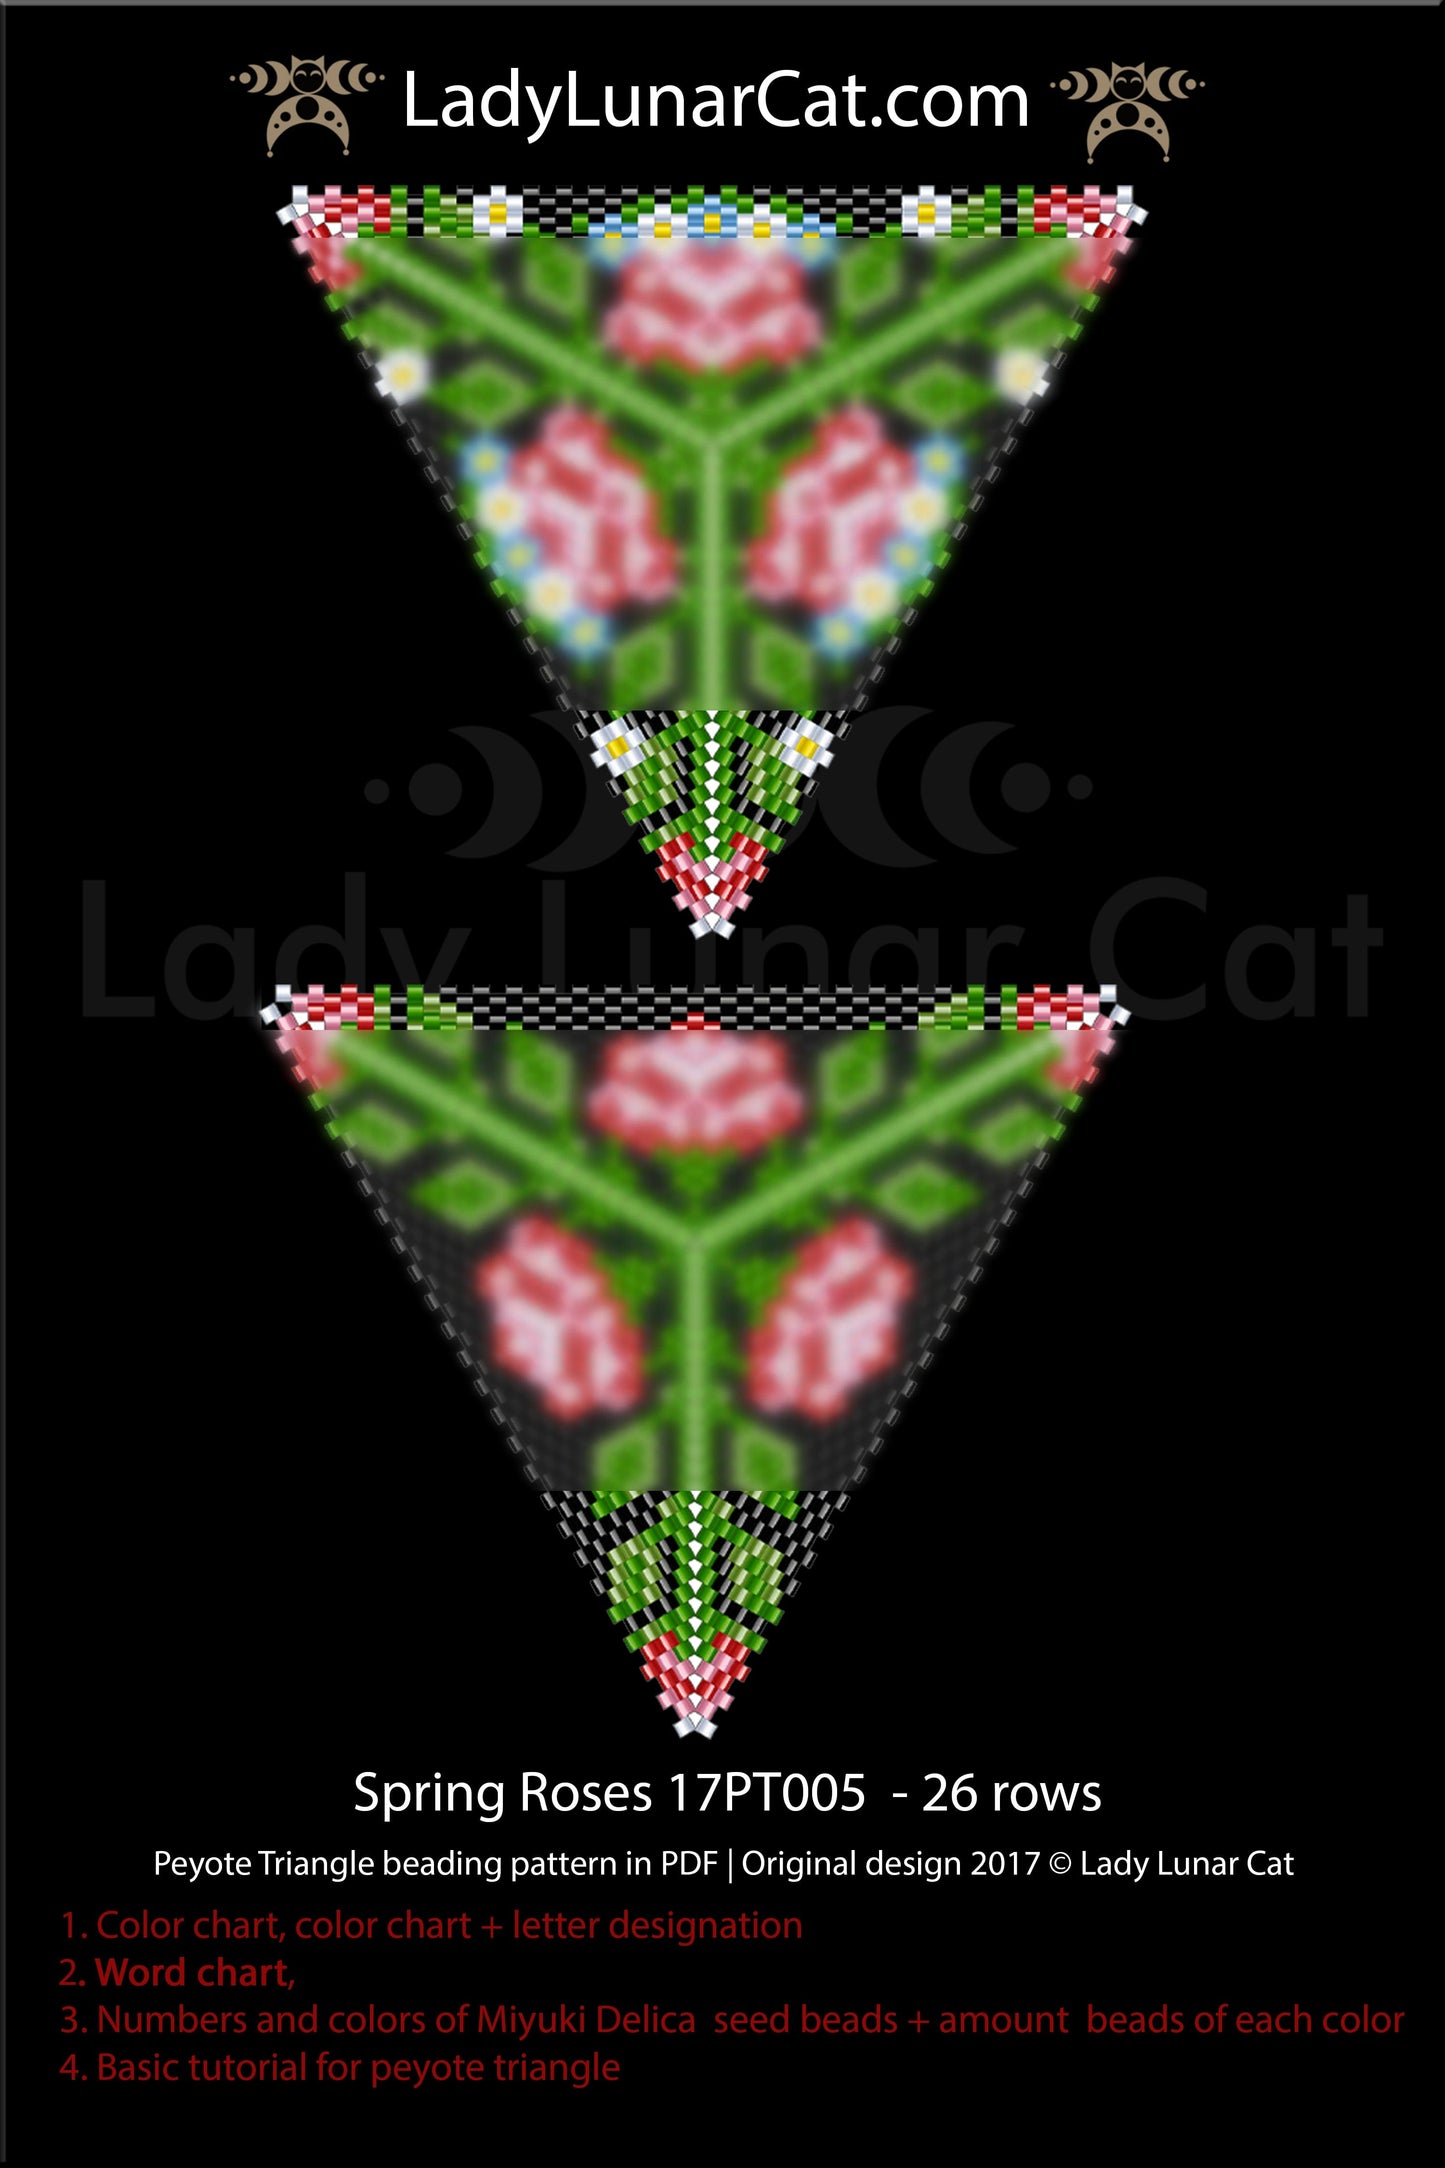 Copy of Peyote triangle pattern for beading Roses 16PT002 LadyLunarCat